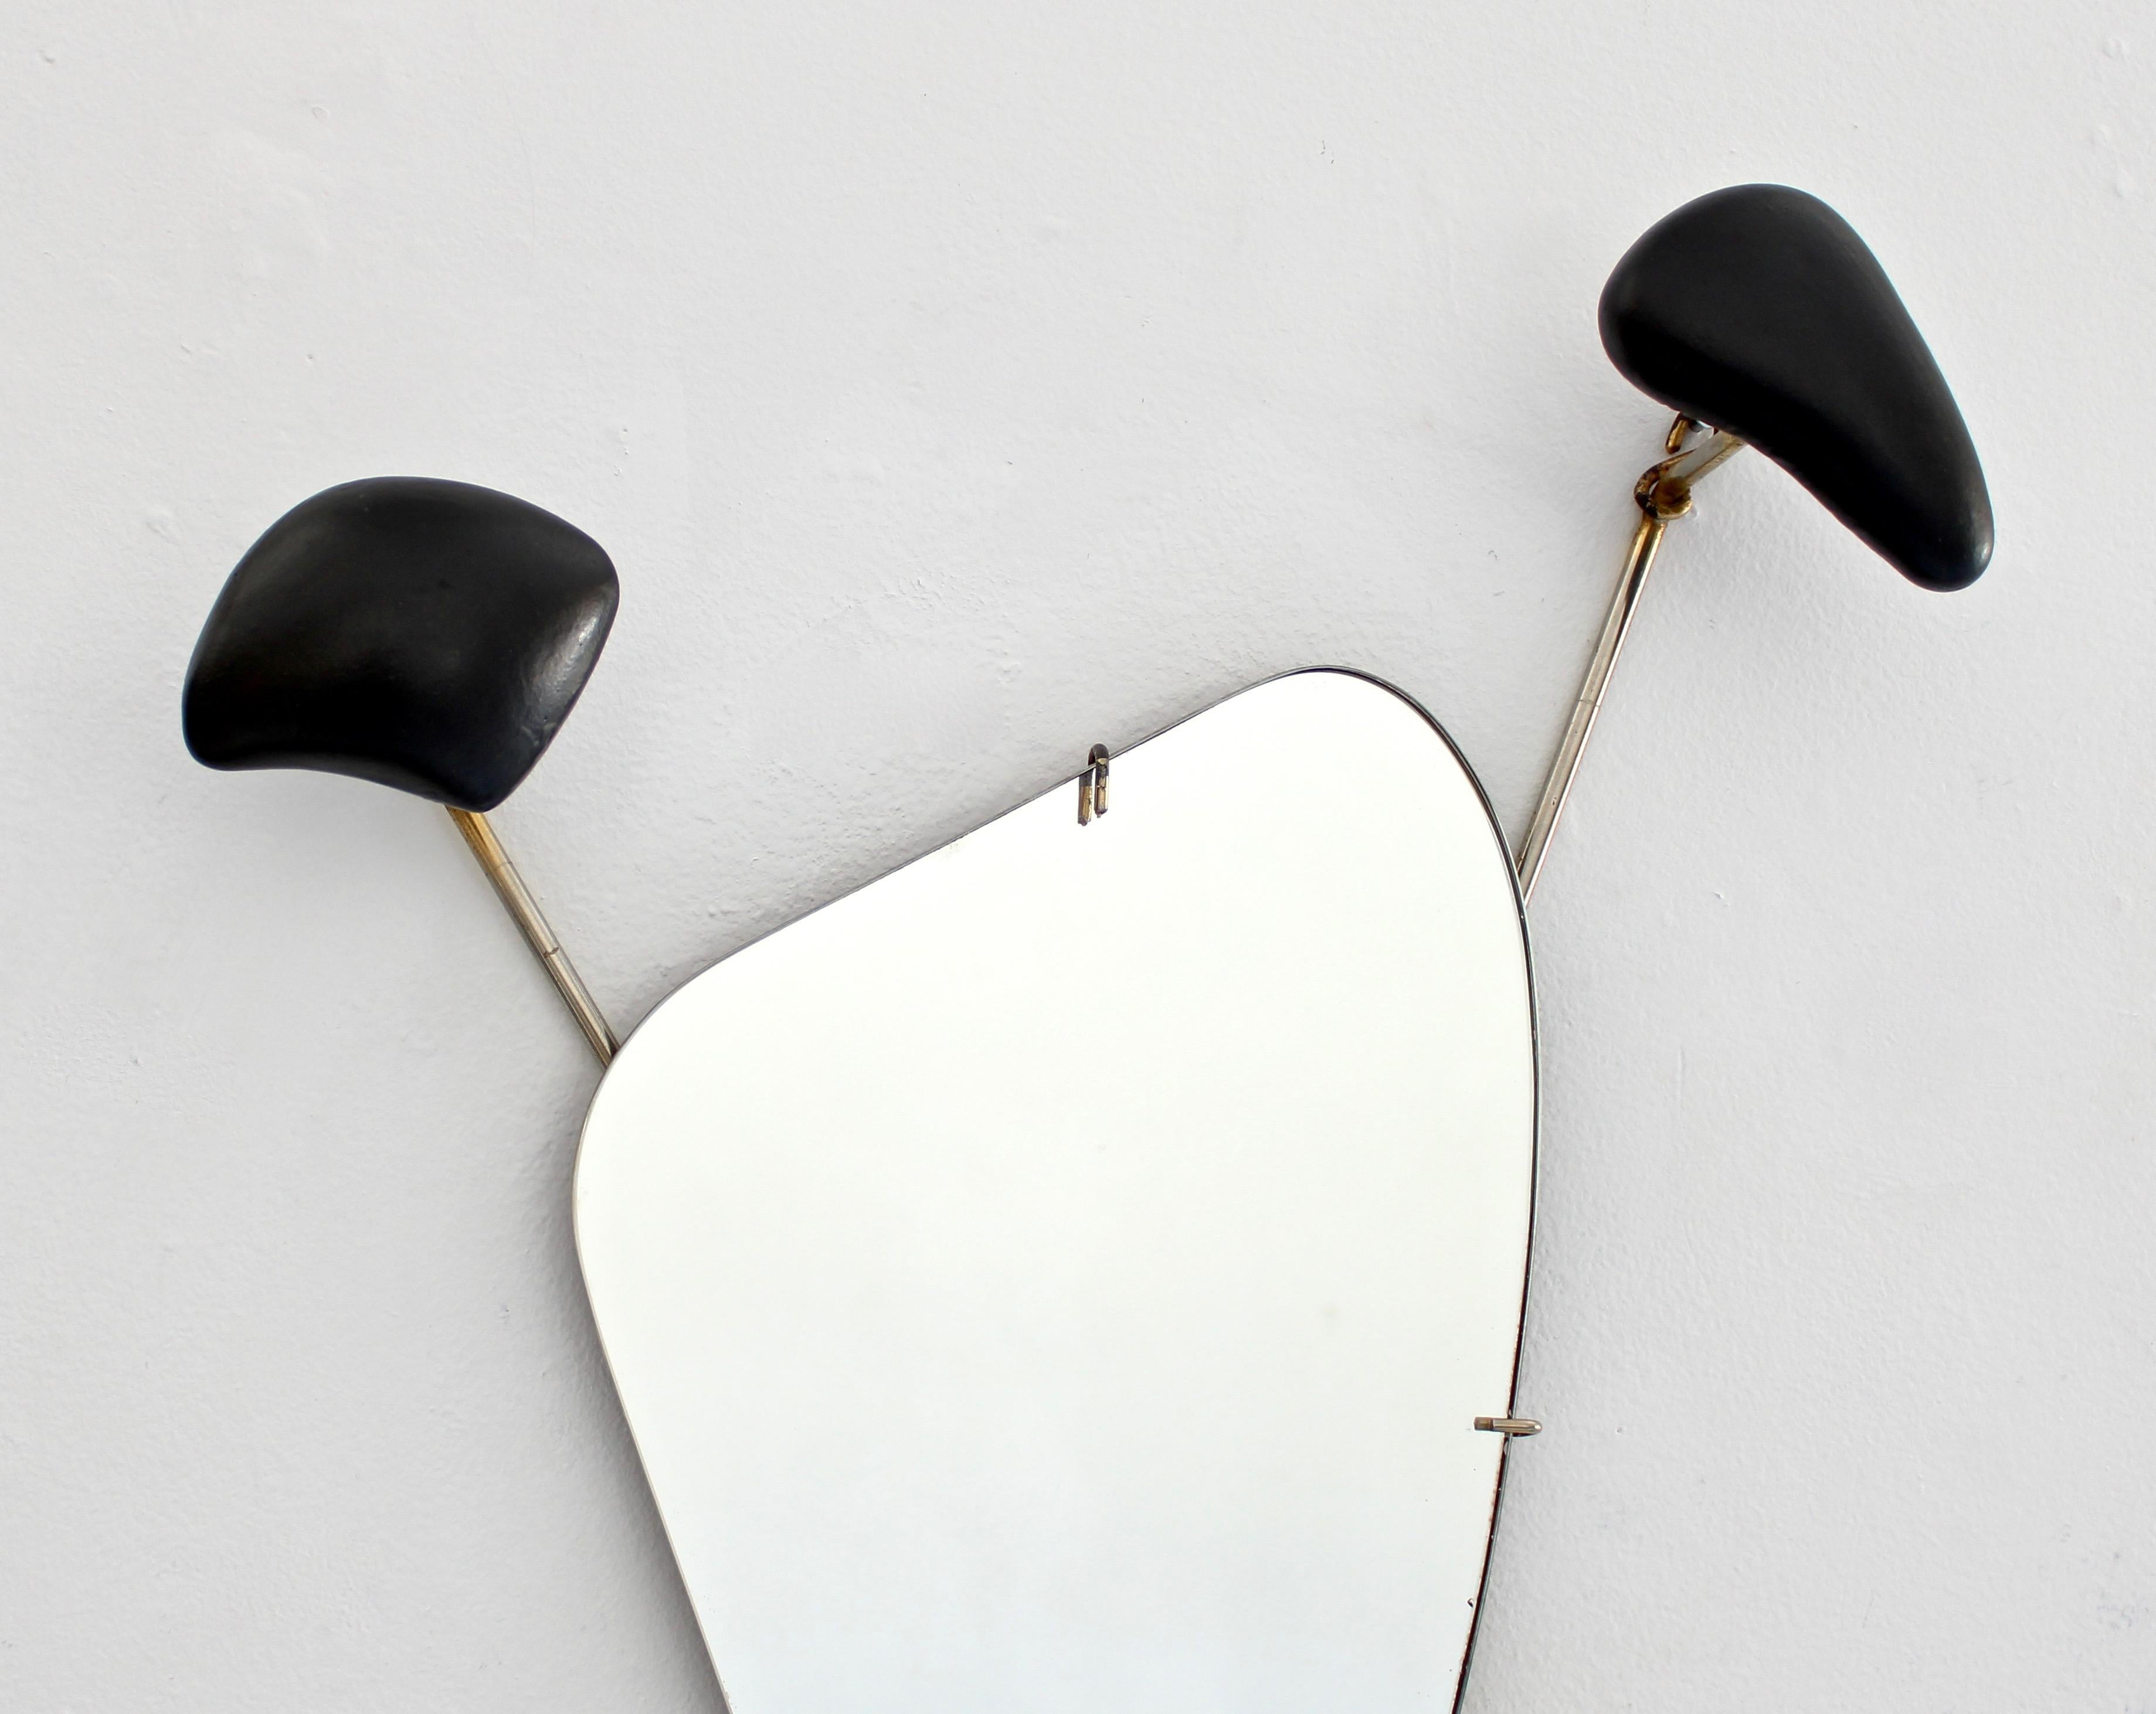 French Georges Jouve Black Ceramic Coat Rack with Mirror in Brass Frame, circa 1955